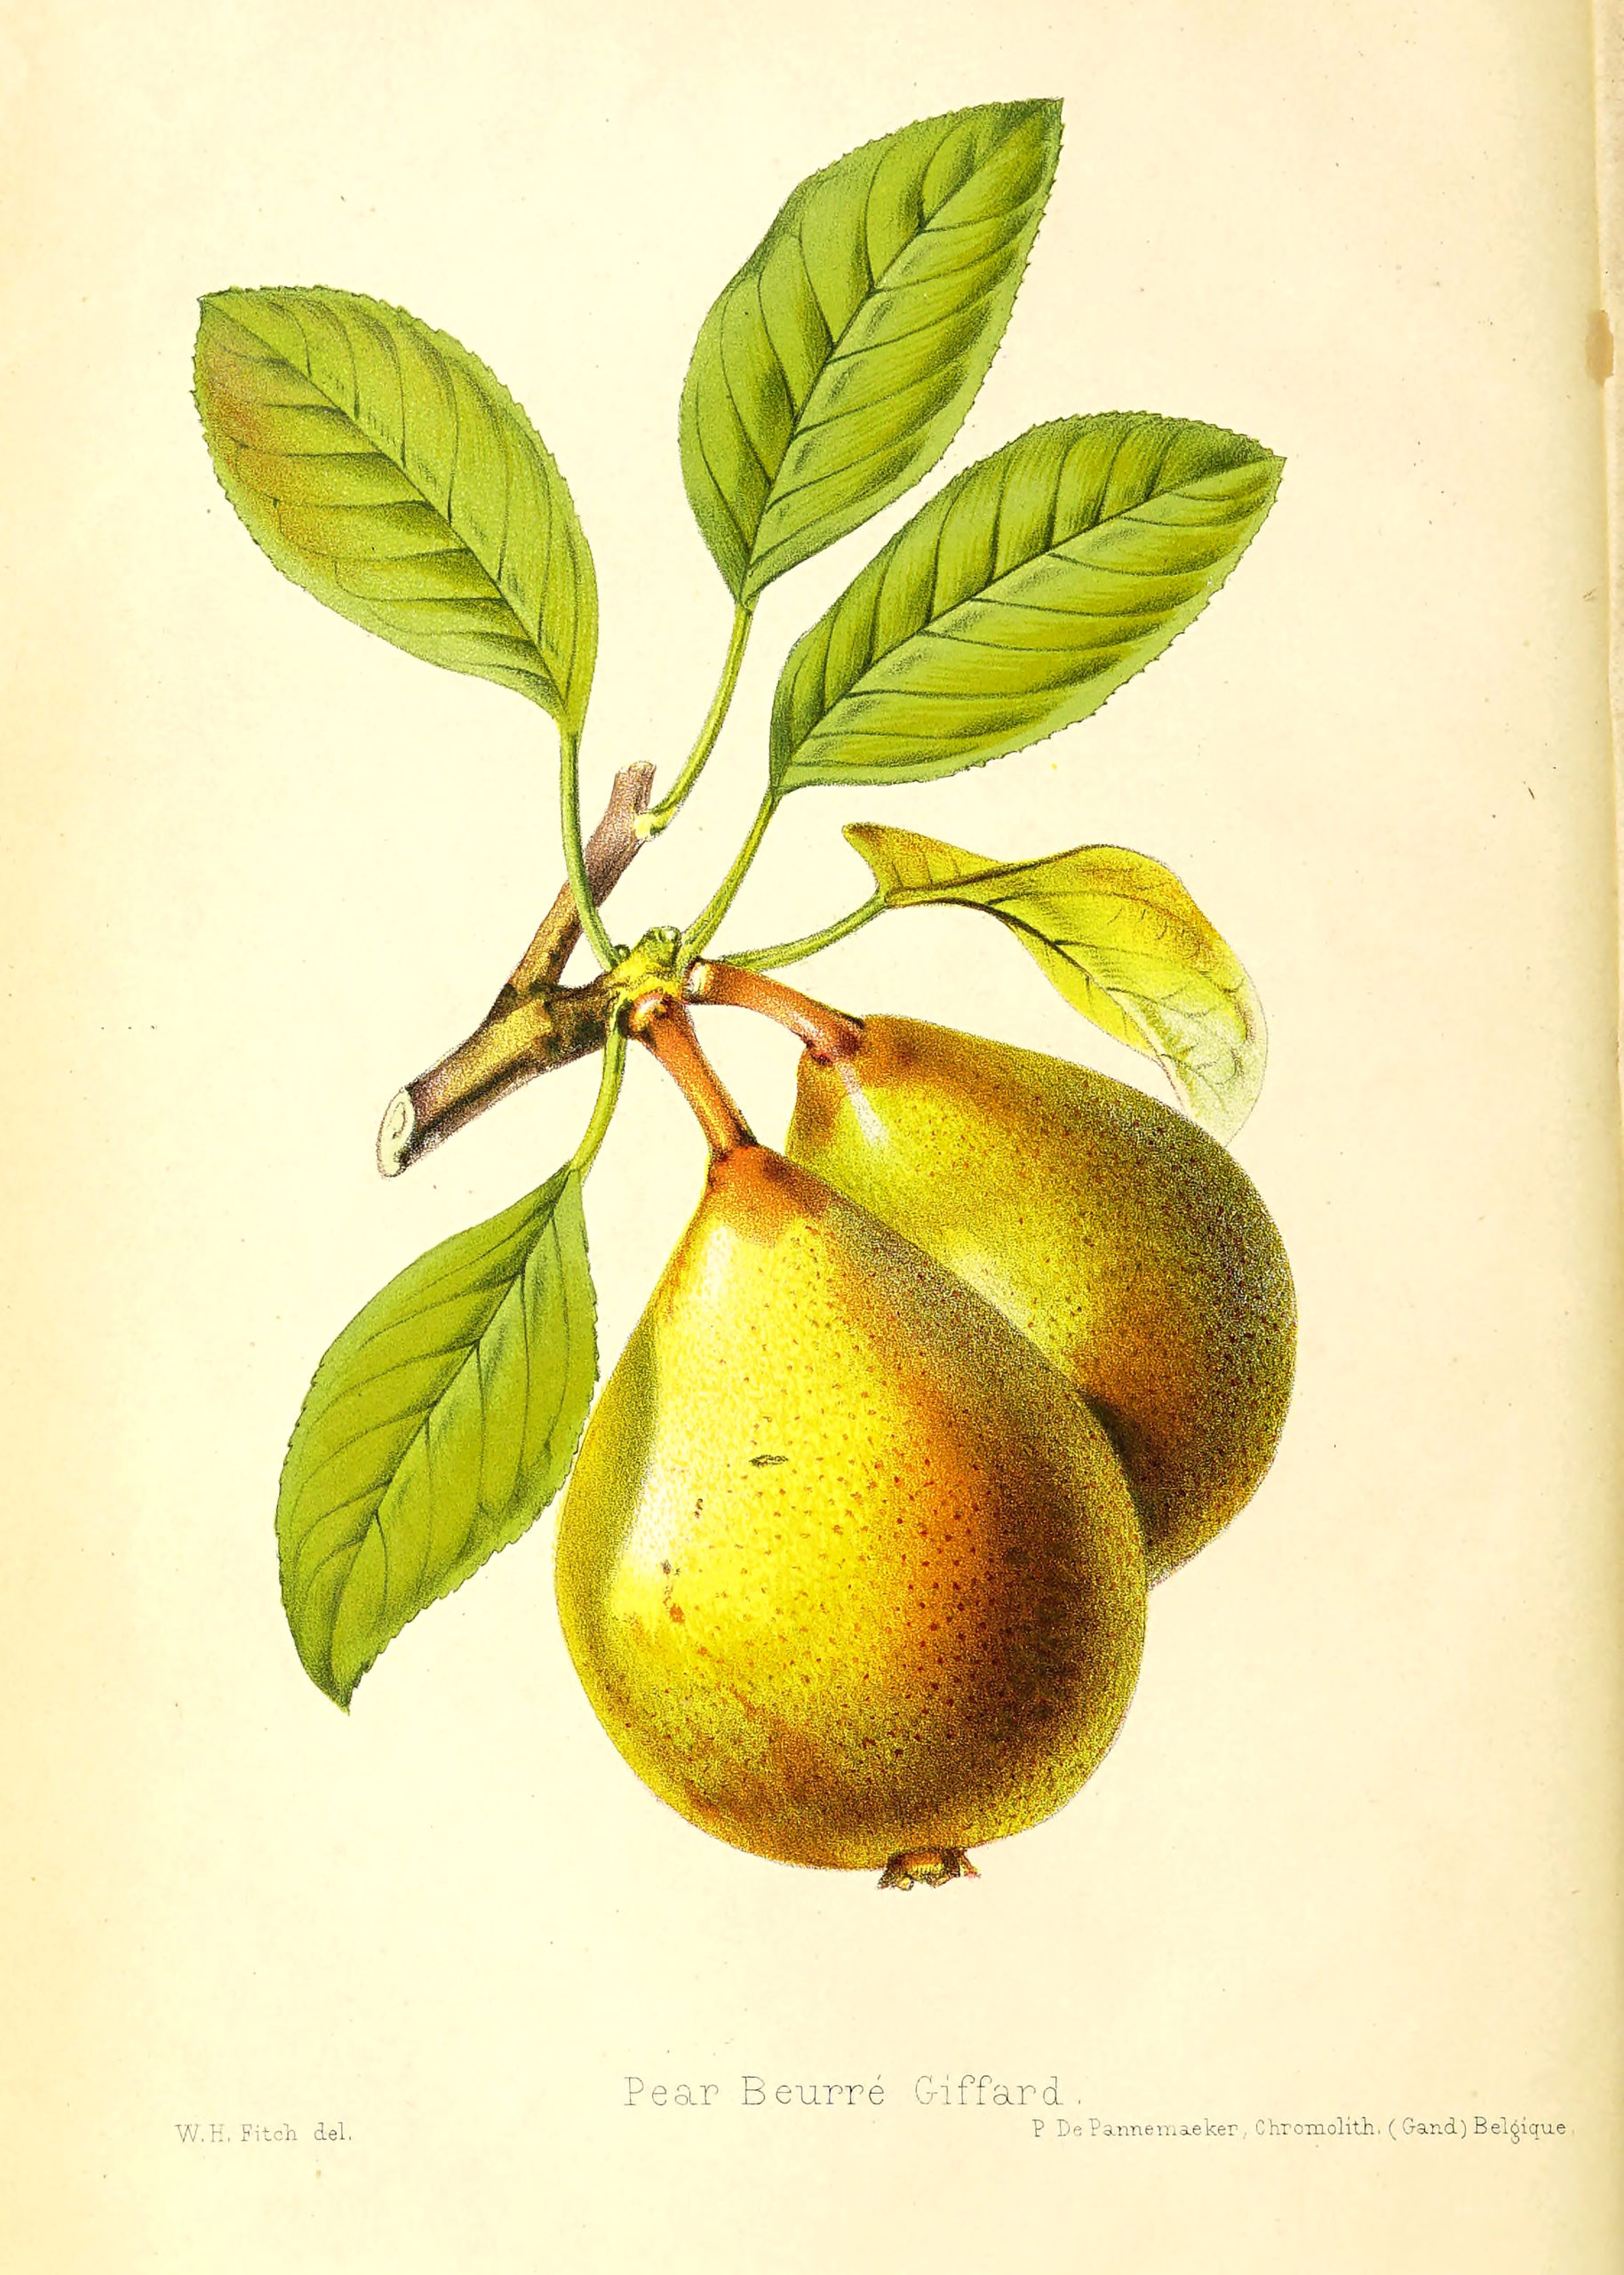 Vintage Botanical Prints - 13 in a series - Pear Beurré Giffard from The florist and pomologist (1879)